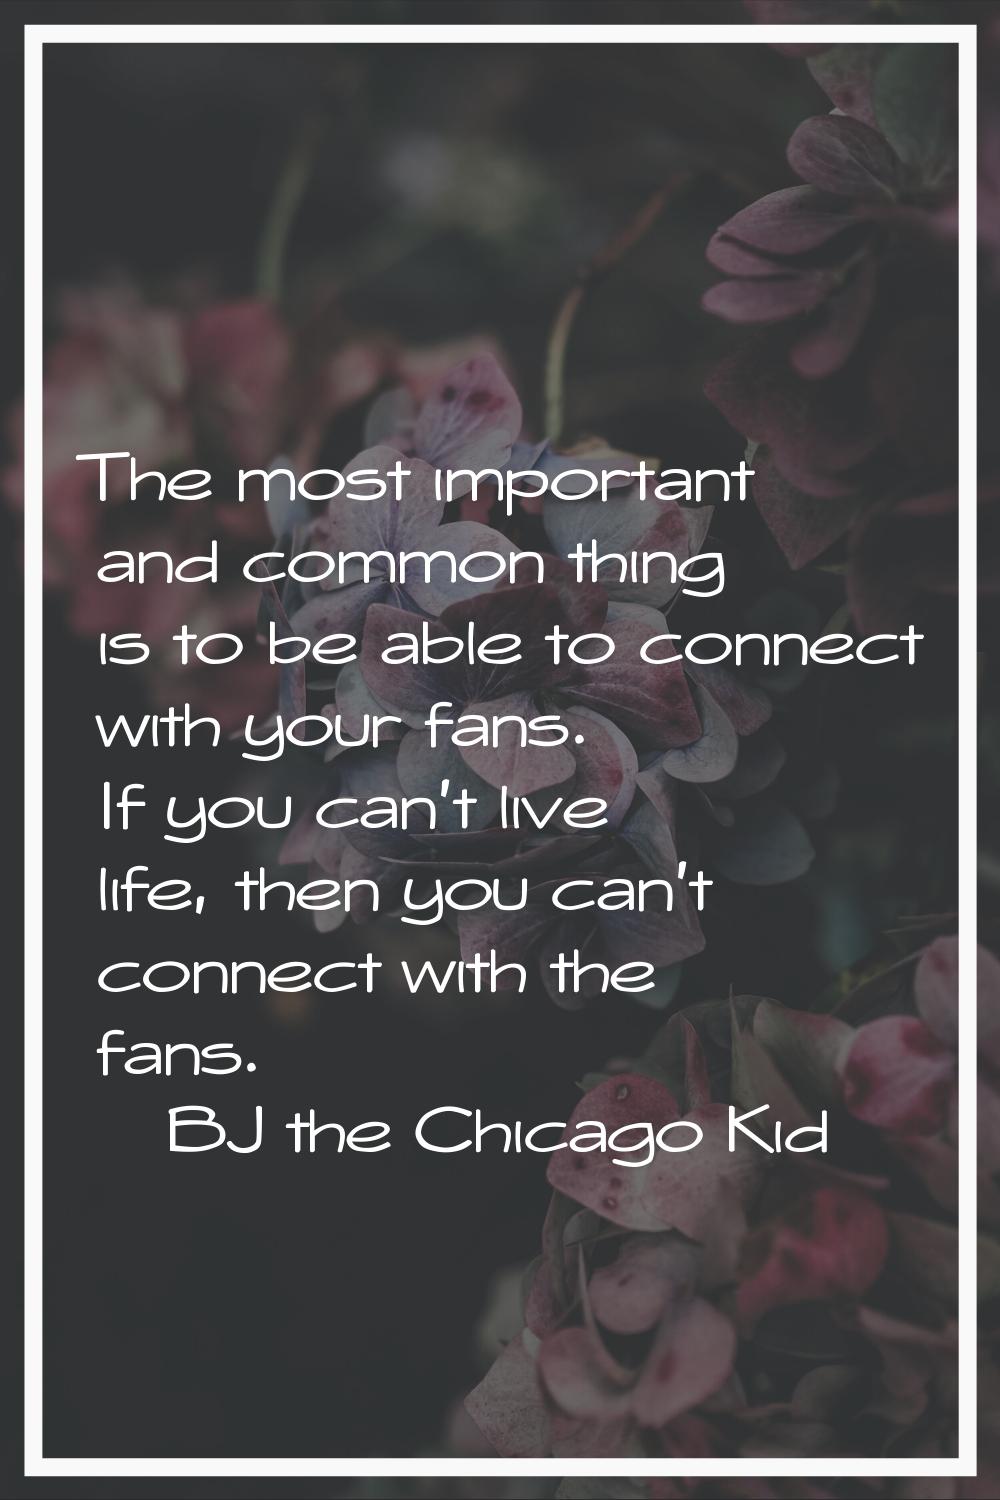 The most important and common thing is to be able to connect with your fans. If you can't live life